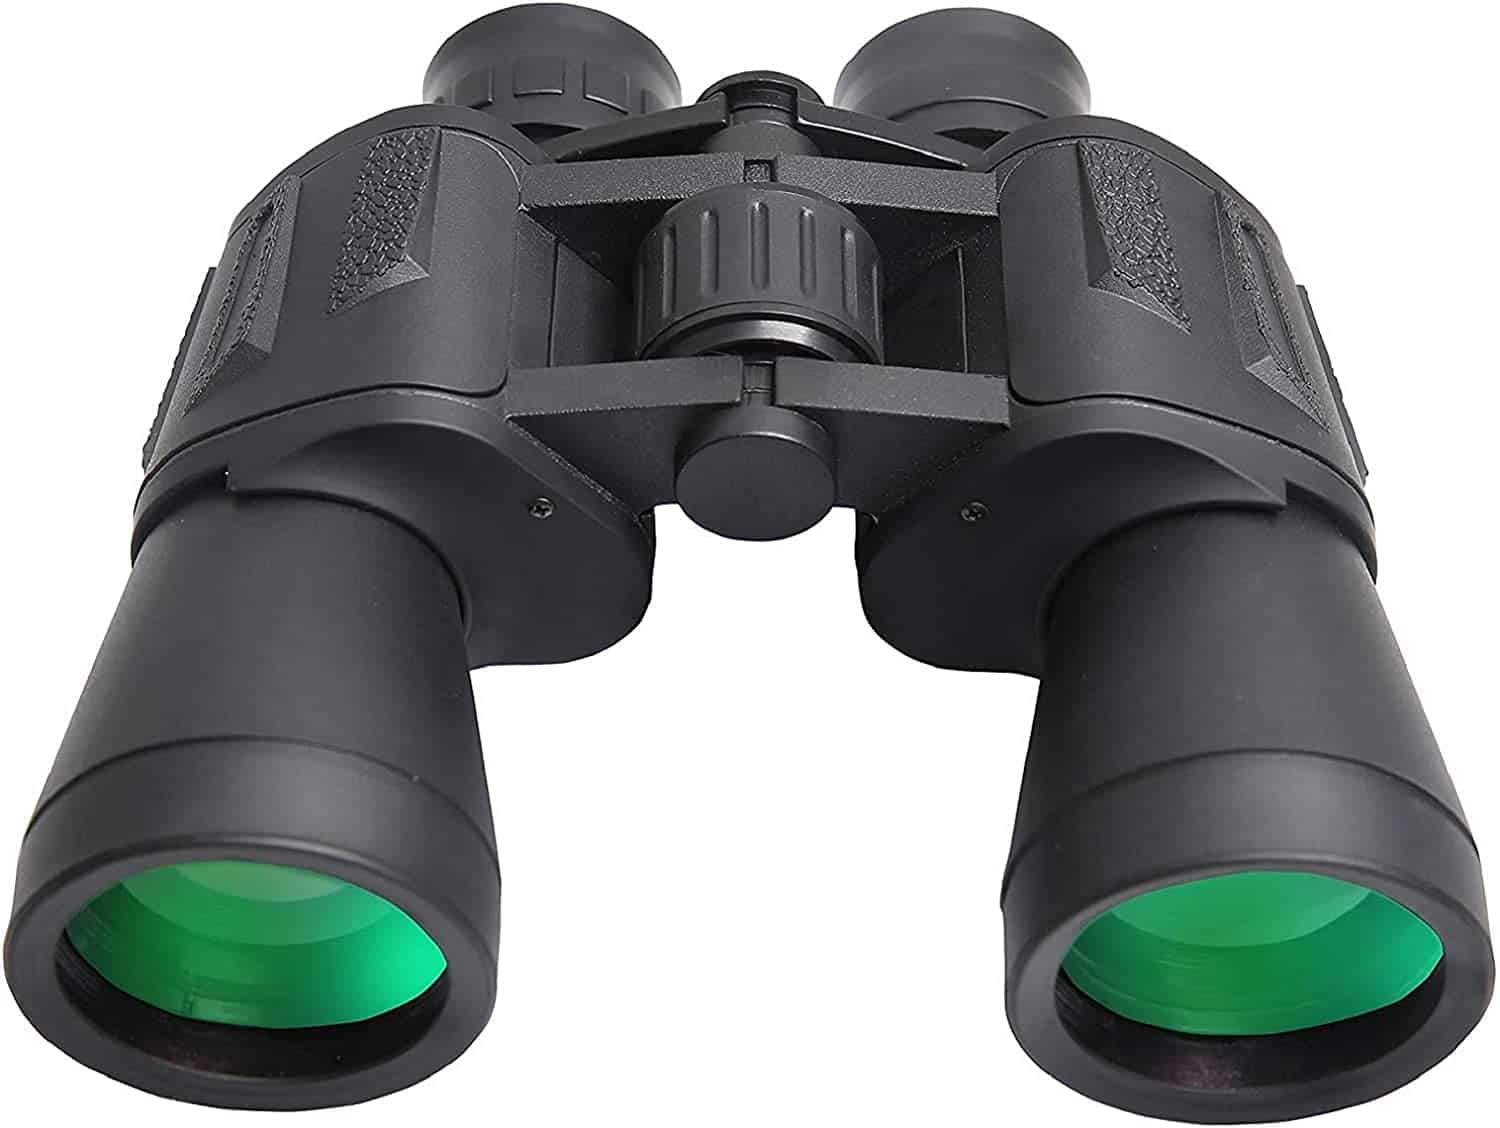 Roof Prism Binoculars for Adults